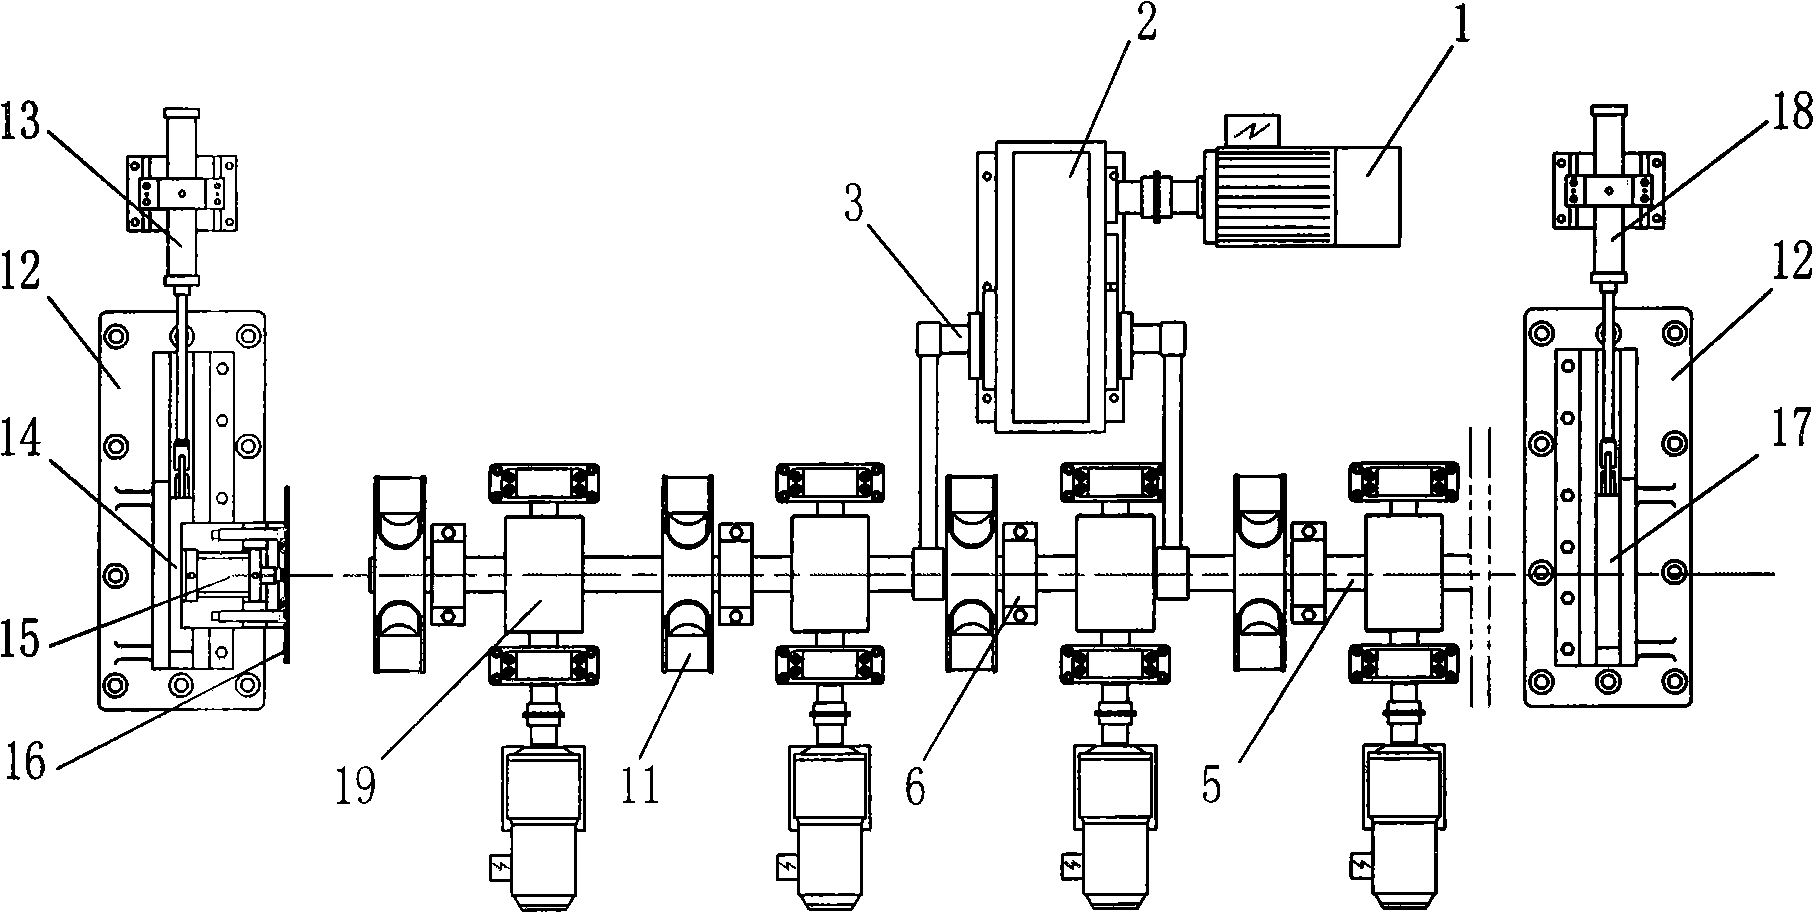 Bar beating and aligning device